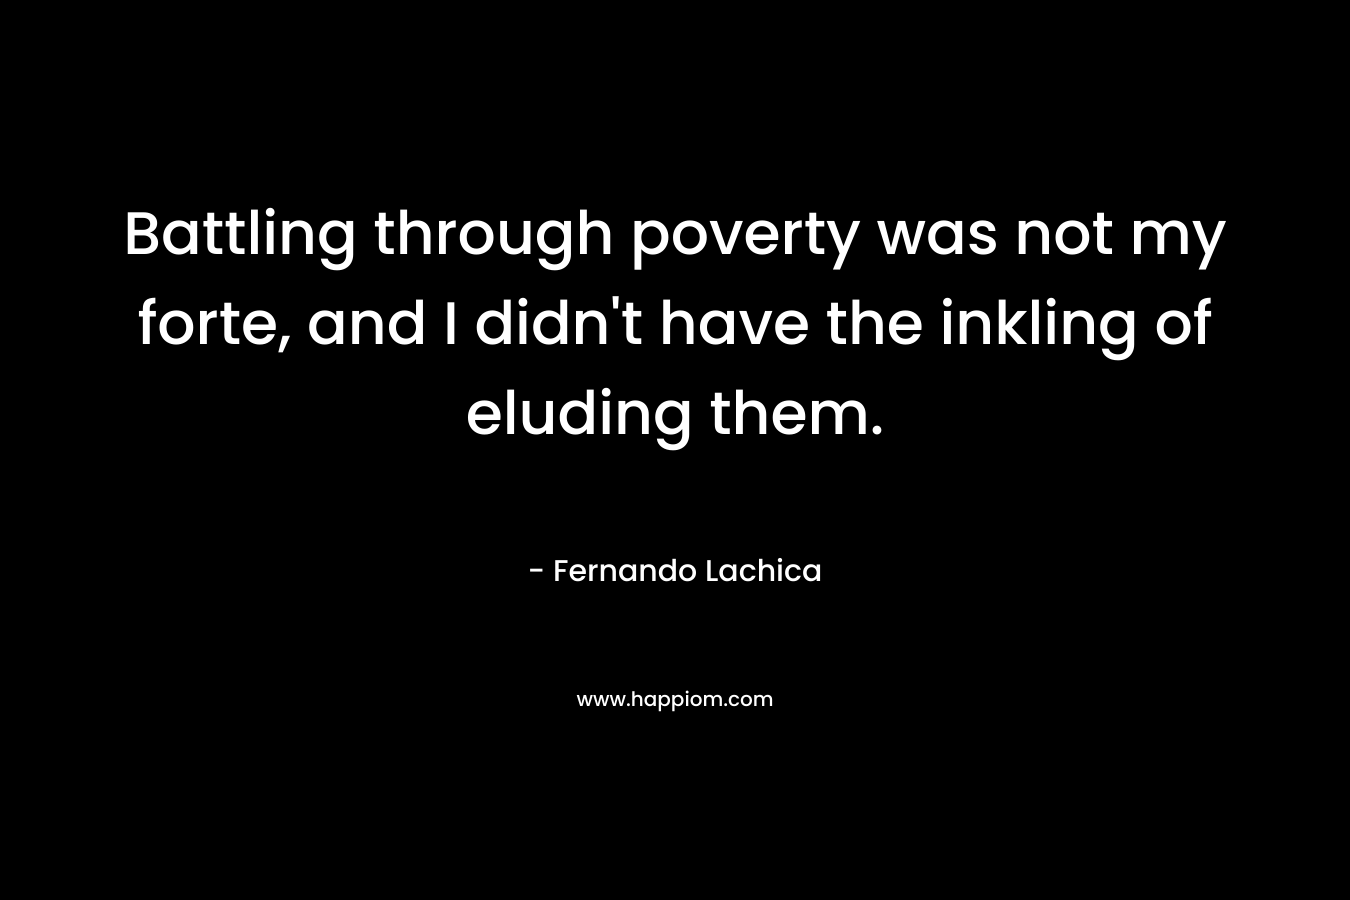 Battling through poverty was not my forte, and I didn’t have the inkling of eluding them. – Fernando Lachica